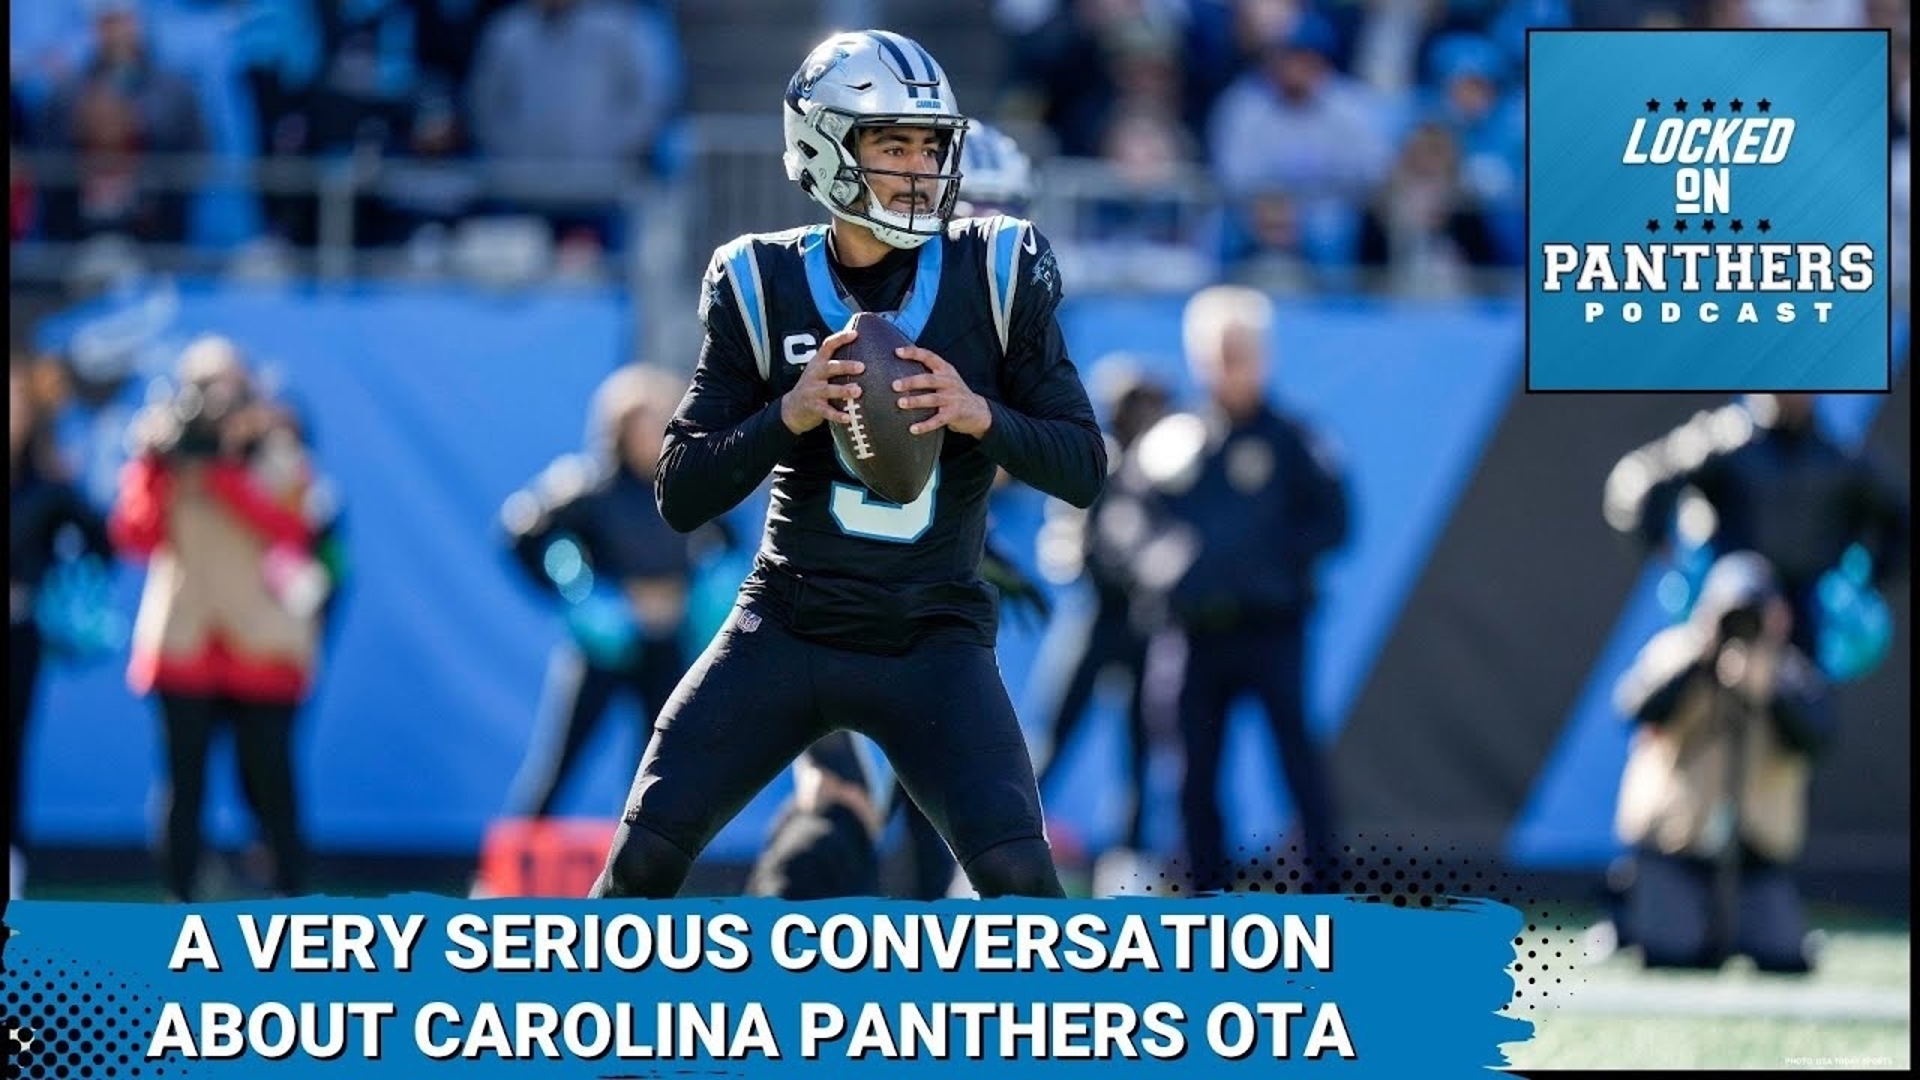 Julian Council is joined by Alex Zietlow, Carolina Panthers beat for the Charlotte Observer, to discuss their takeaways from week two of the Carolina Panthers OTAs.